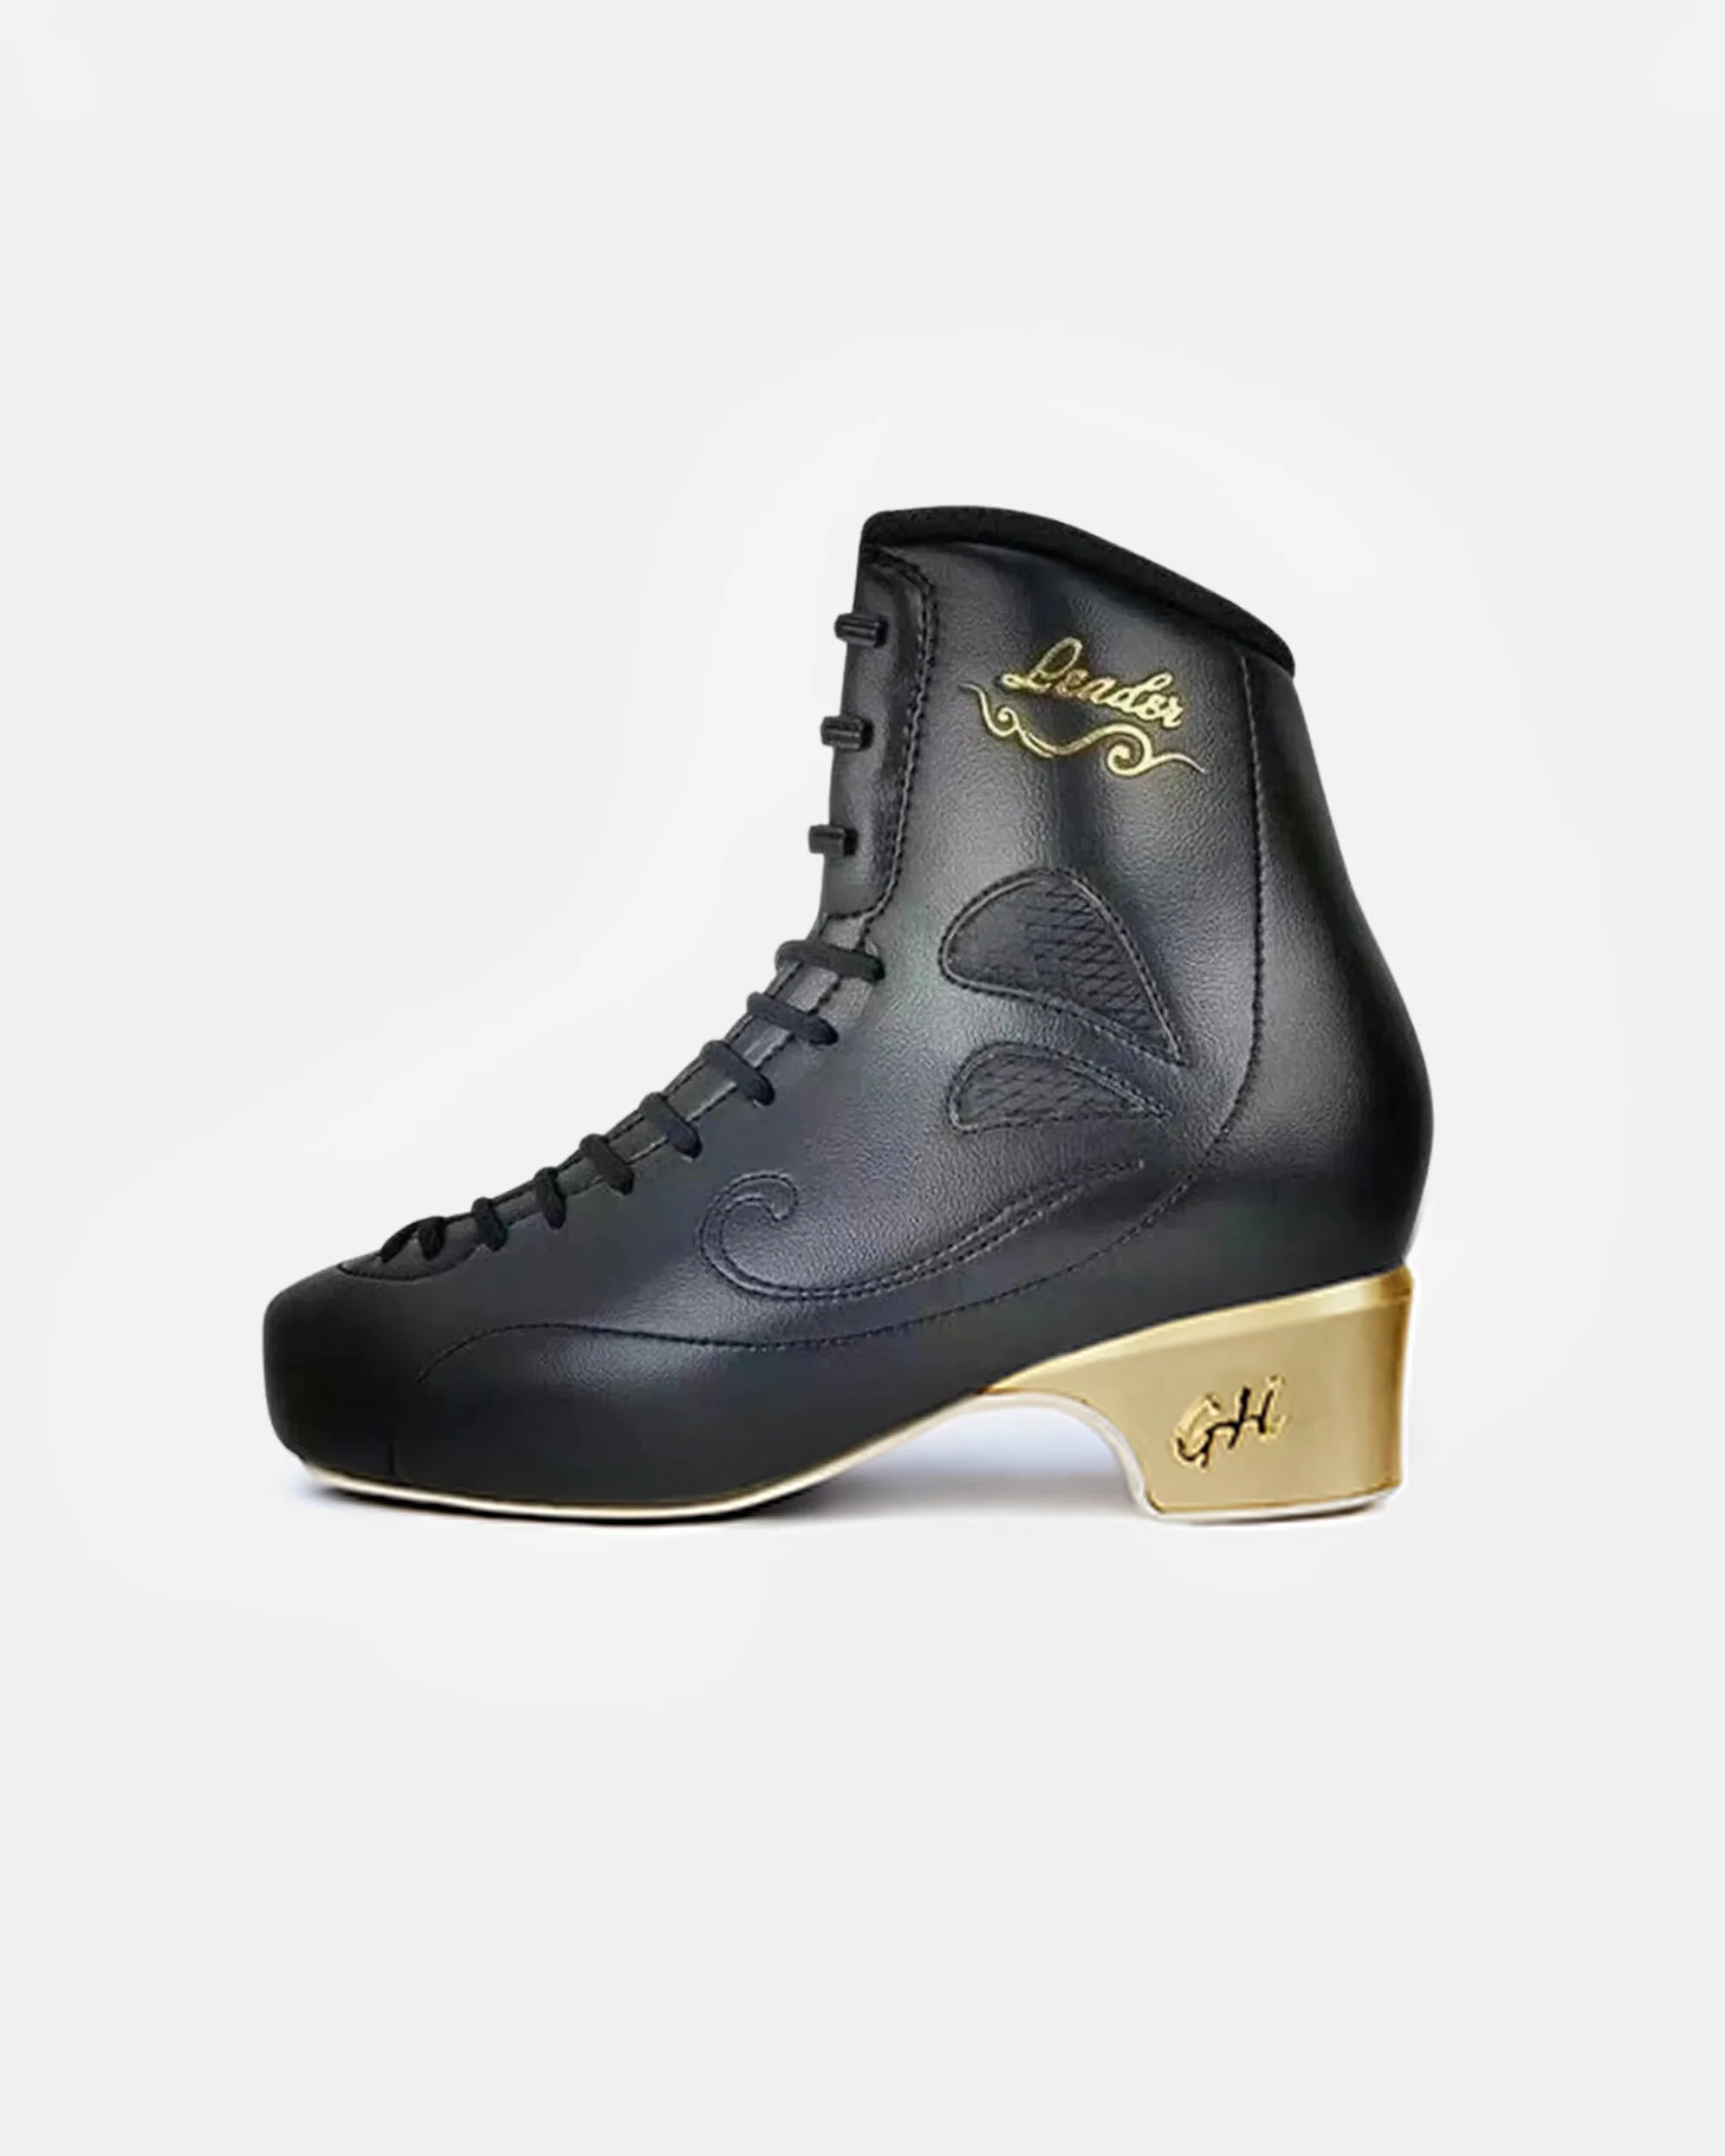 Leader Ice Skates (Boots Only)